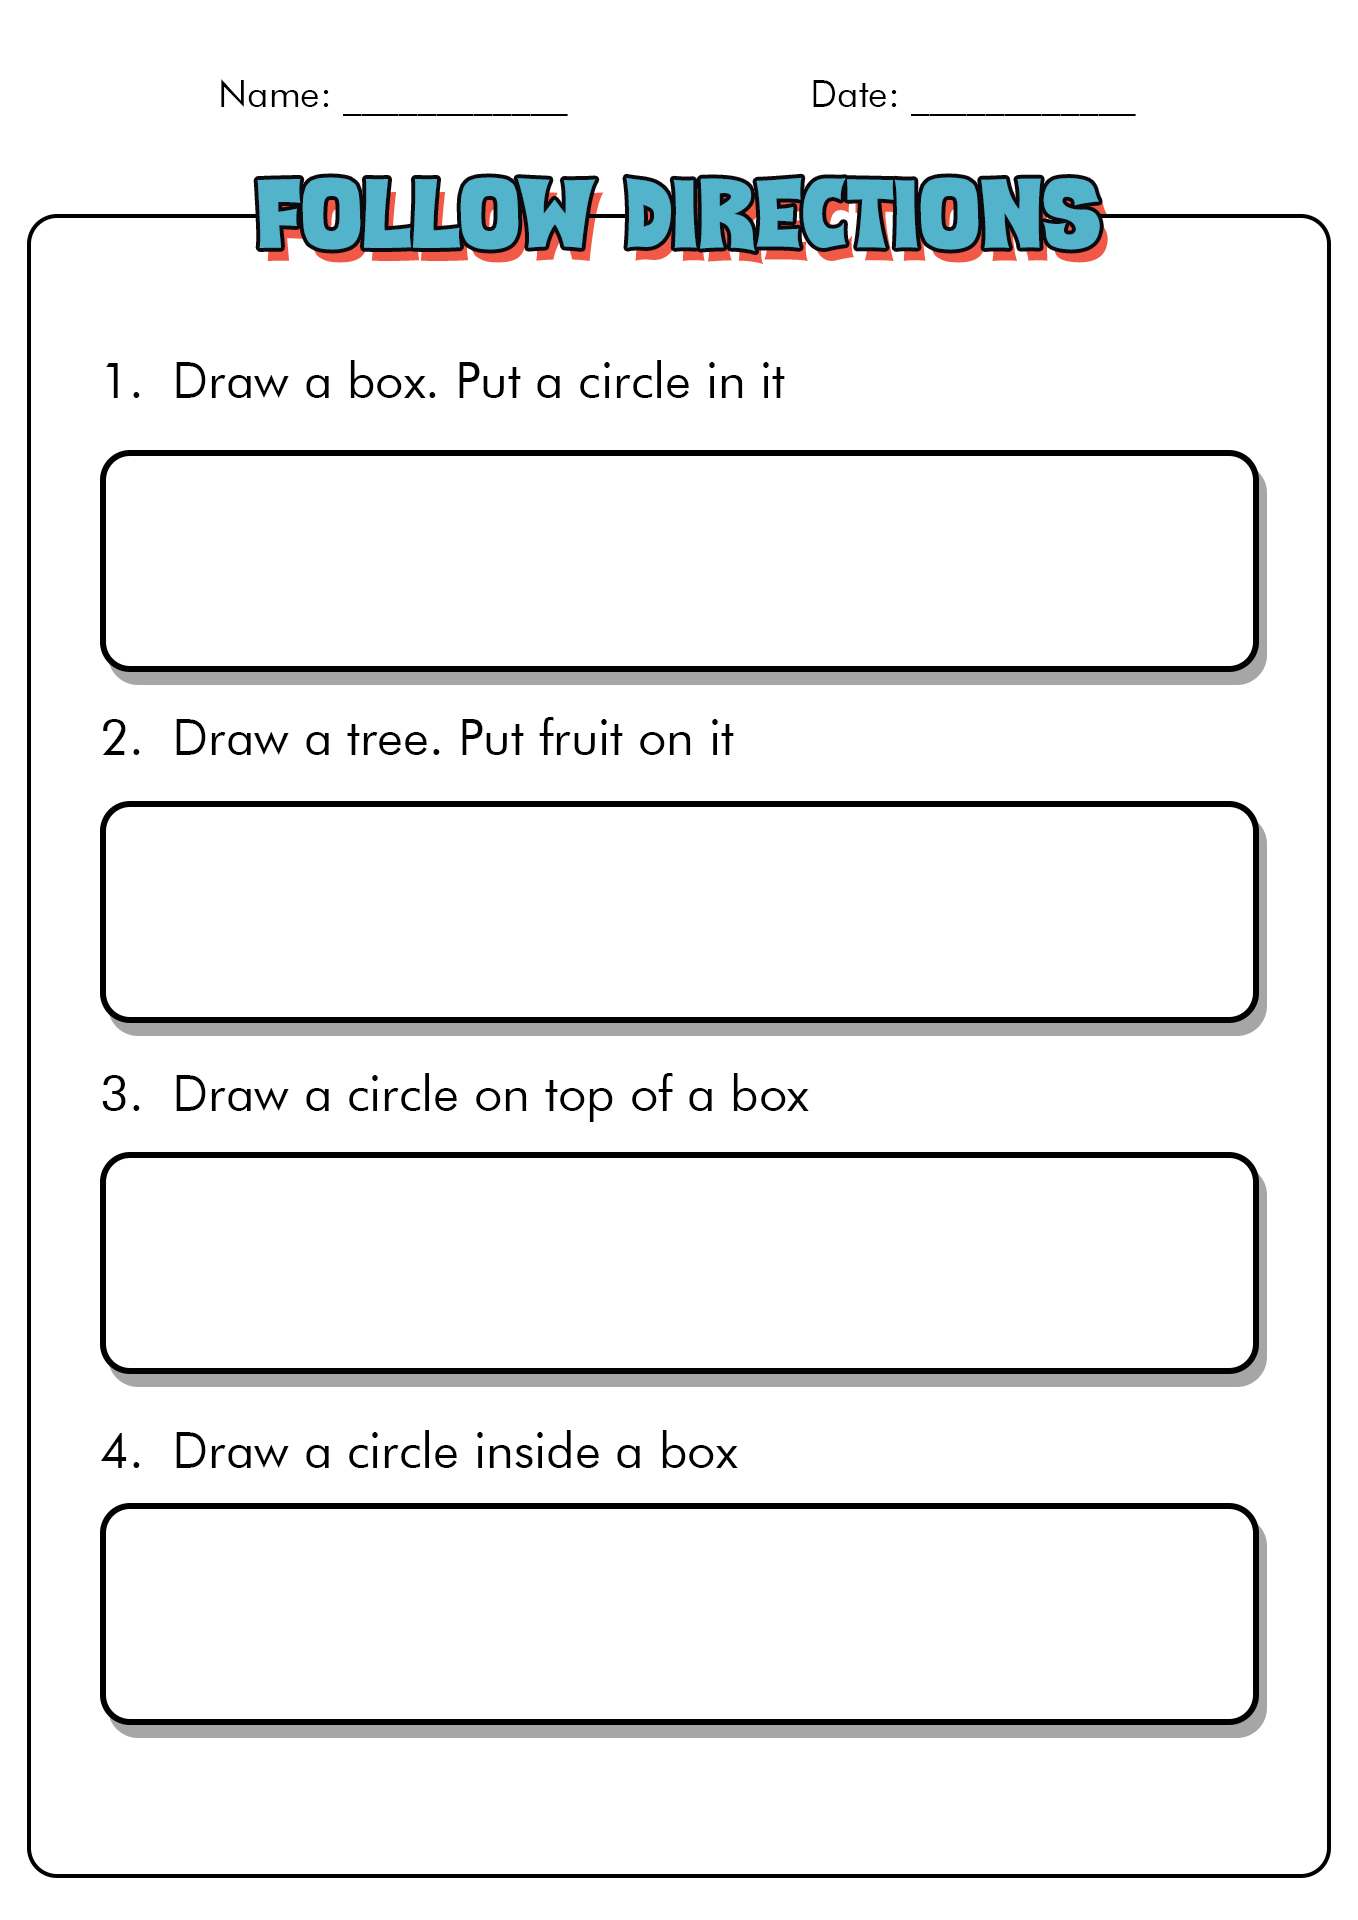 Following Directions Activity Worksheet Image